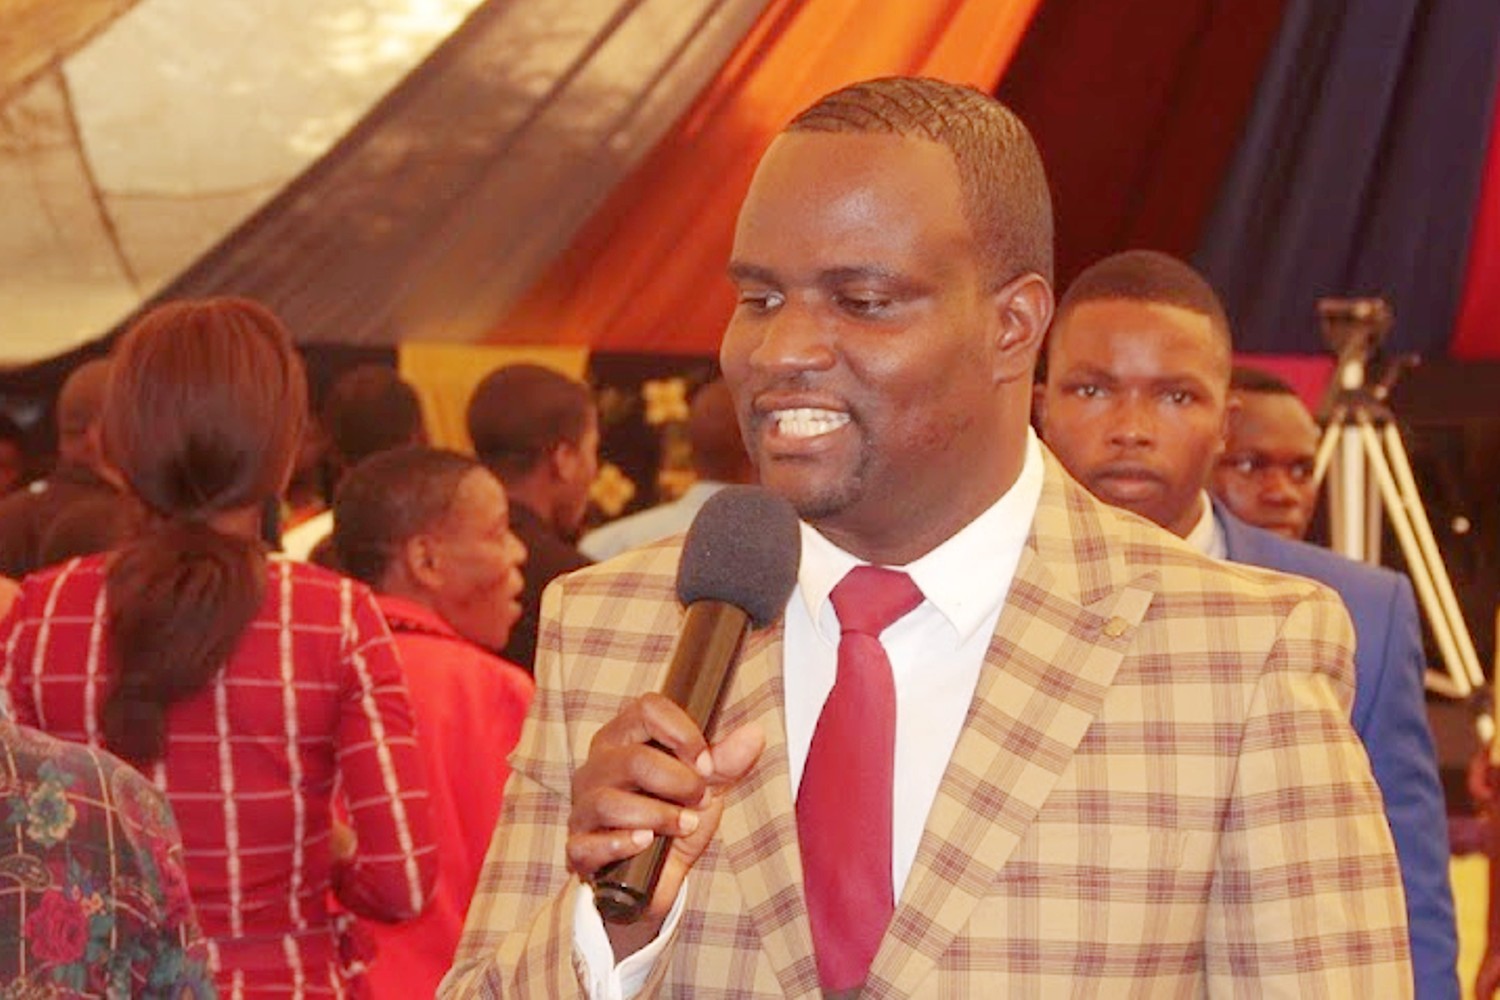 Prophet T Freddy Cleared of Rape and Physical Abuse Charges